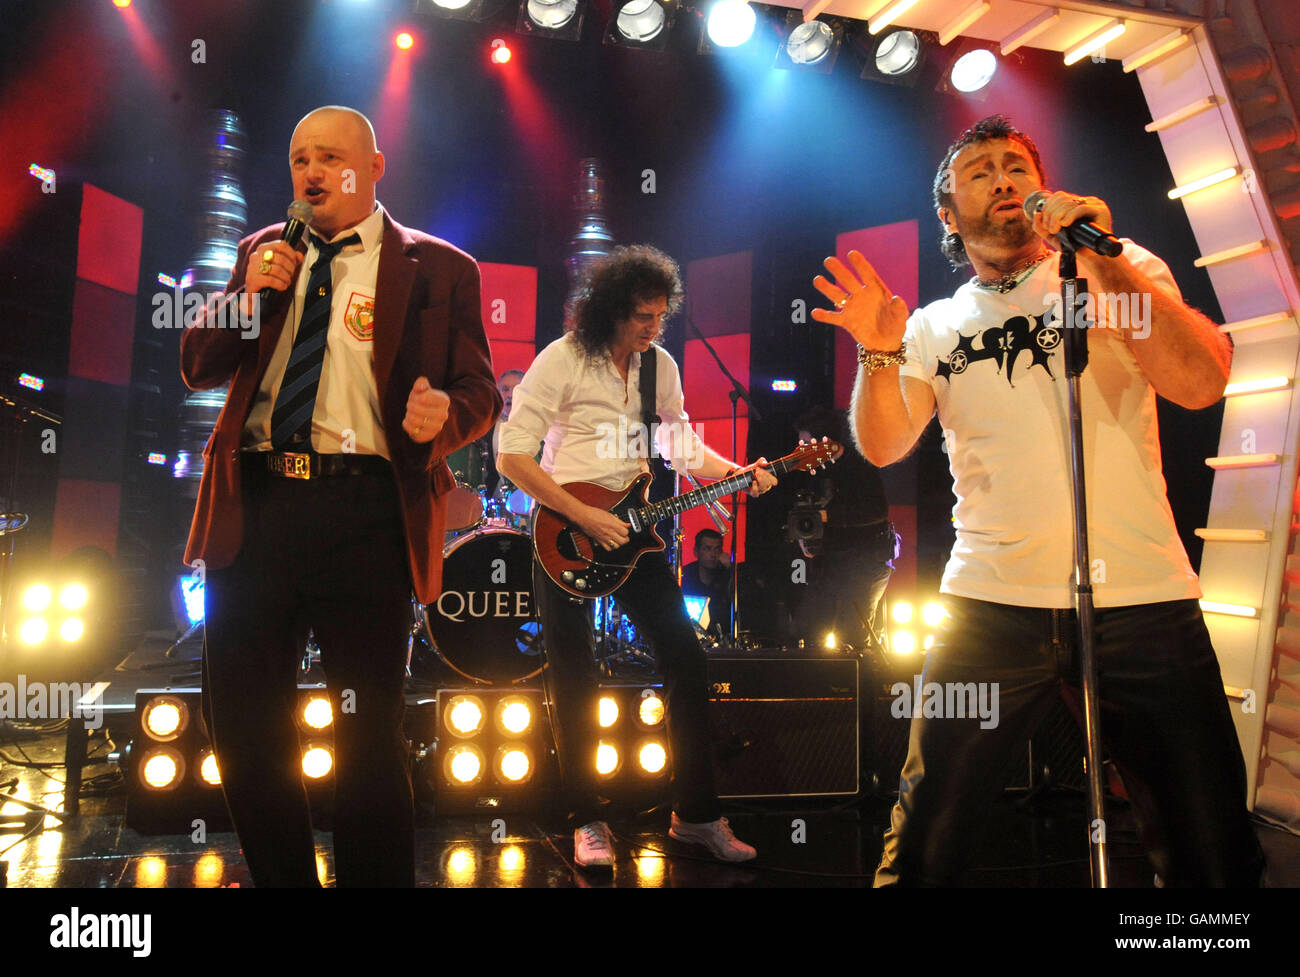 (Left-right) Host Al Murray, Brian May & Paul Rodgers of Queen during their performance on 'Al Murray's Happy Hour' (TX: ITV1 Friday April 4, 2008 @ 2200), London Studios, SE1. Stock Photo